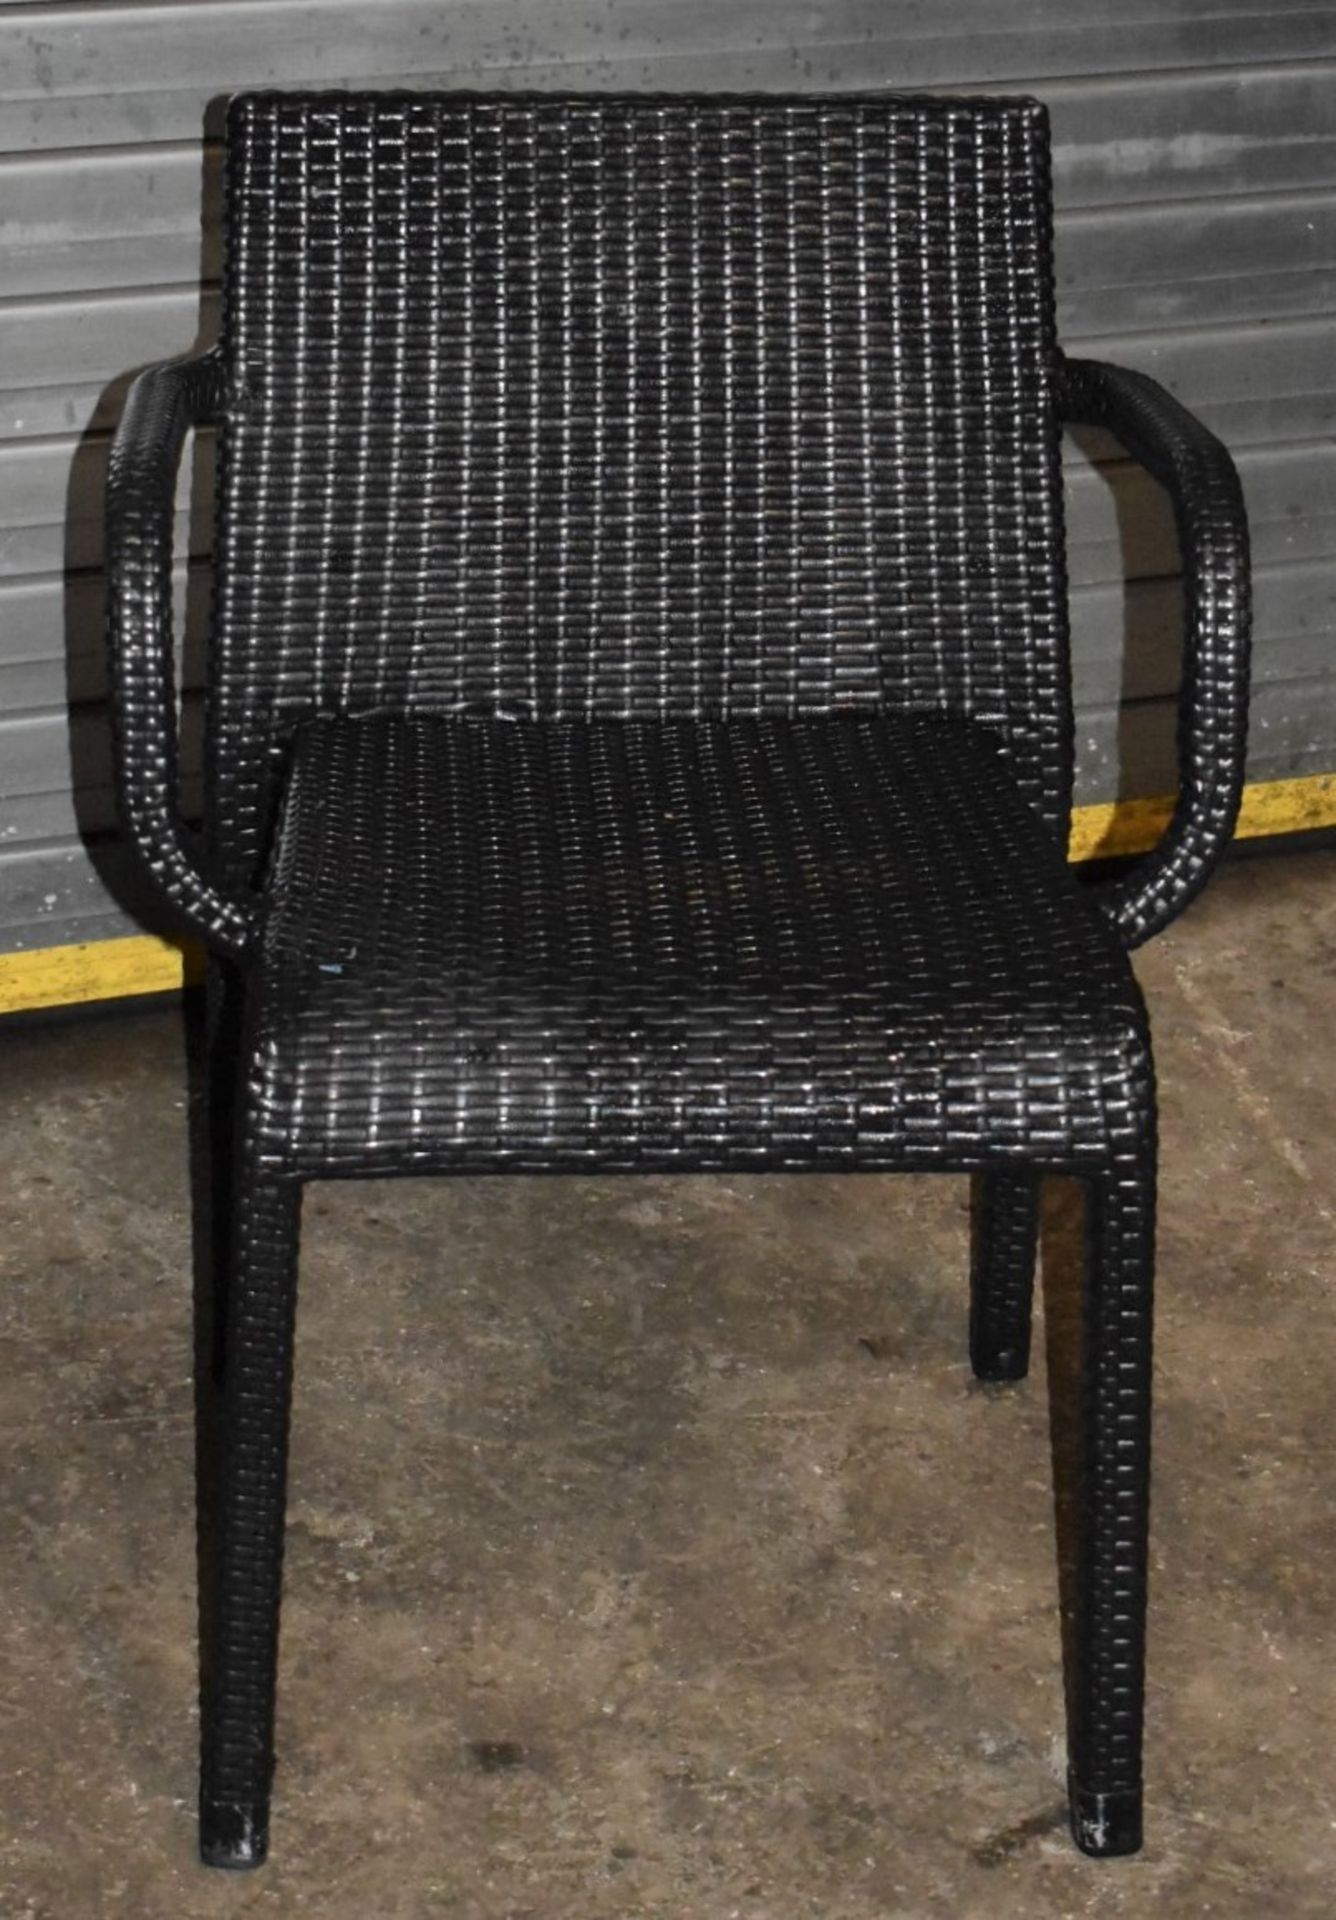 6 x Outdoor Stackable Rattan Chairs With Arm Rests - CL999 - Ref WH5 - Provided in Very Good - Image 5 of 9